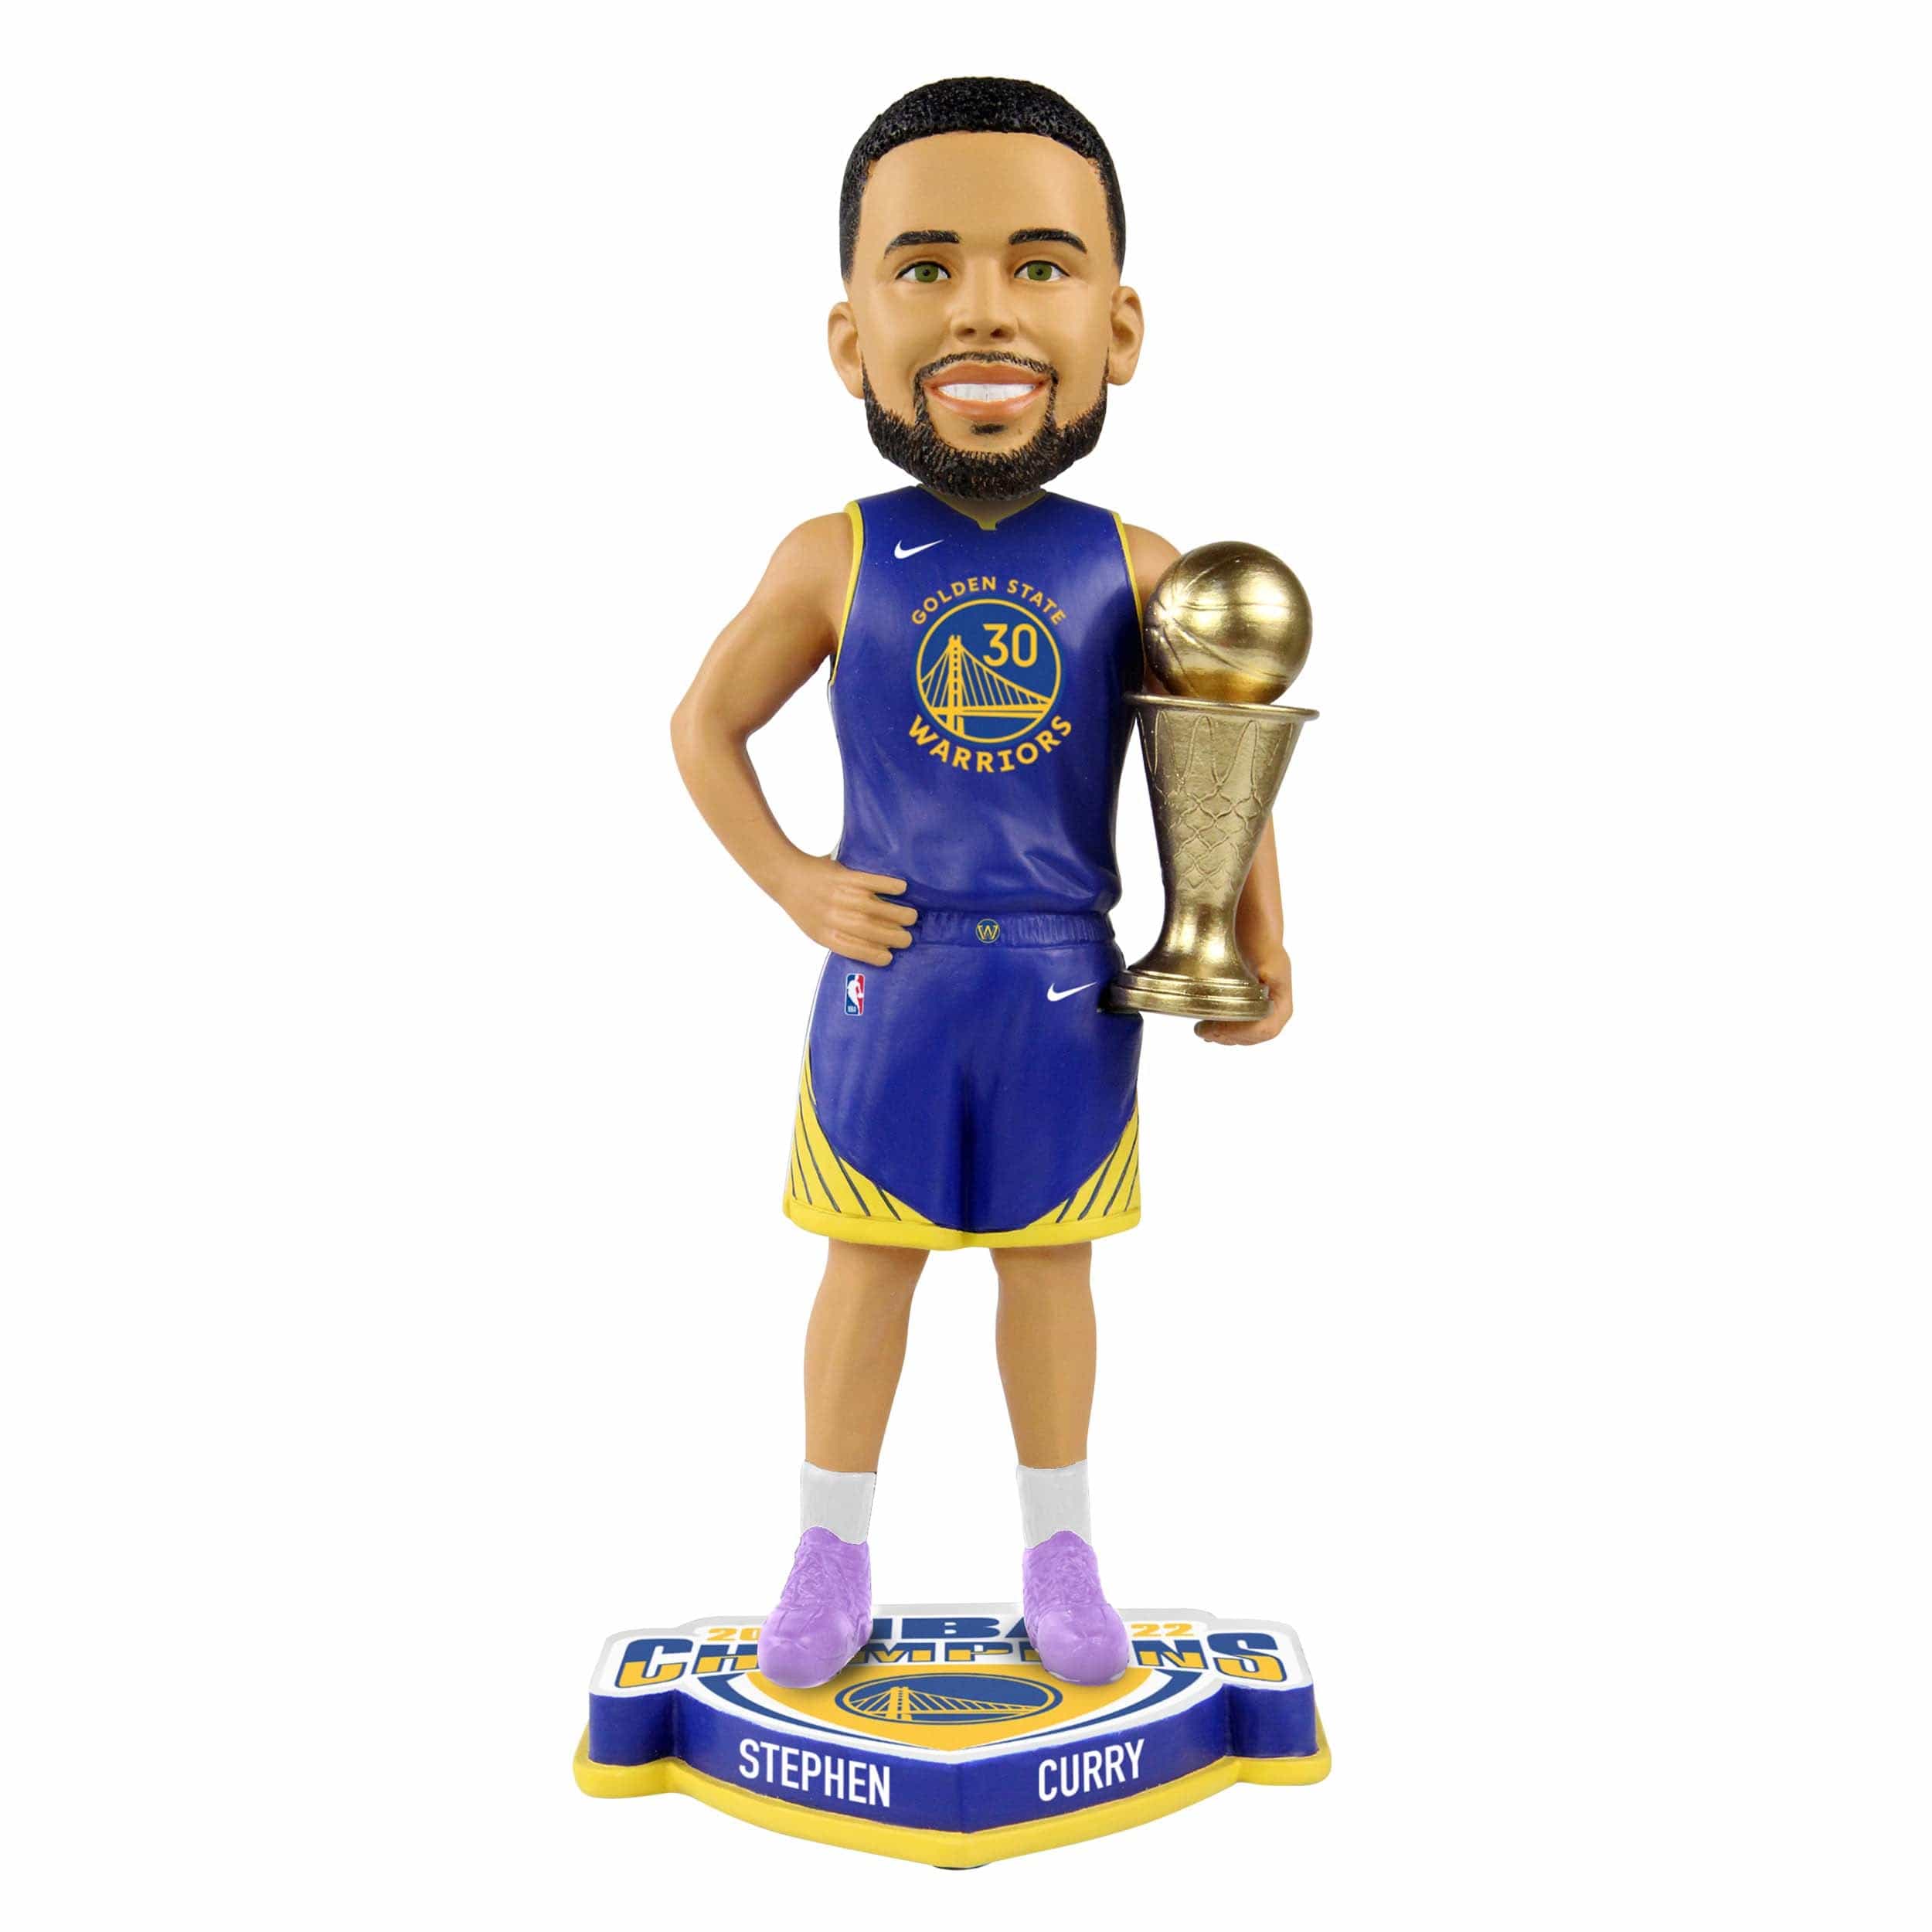 Stephen curry player bobble-